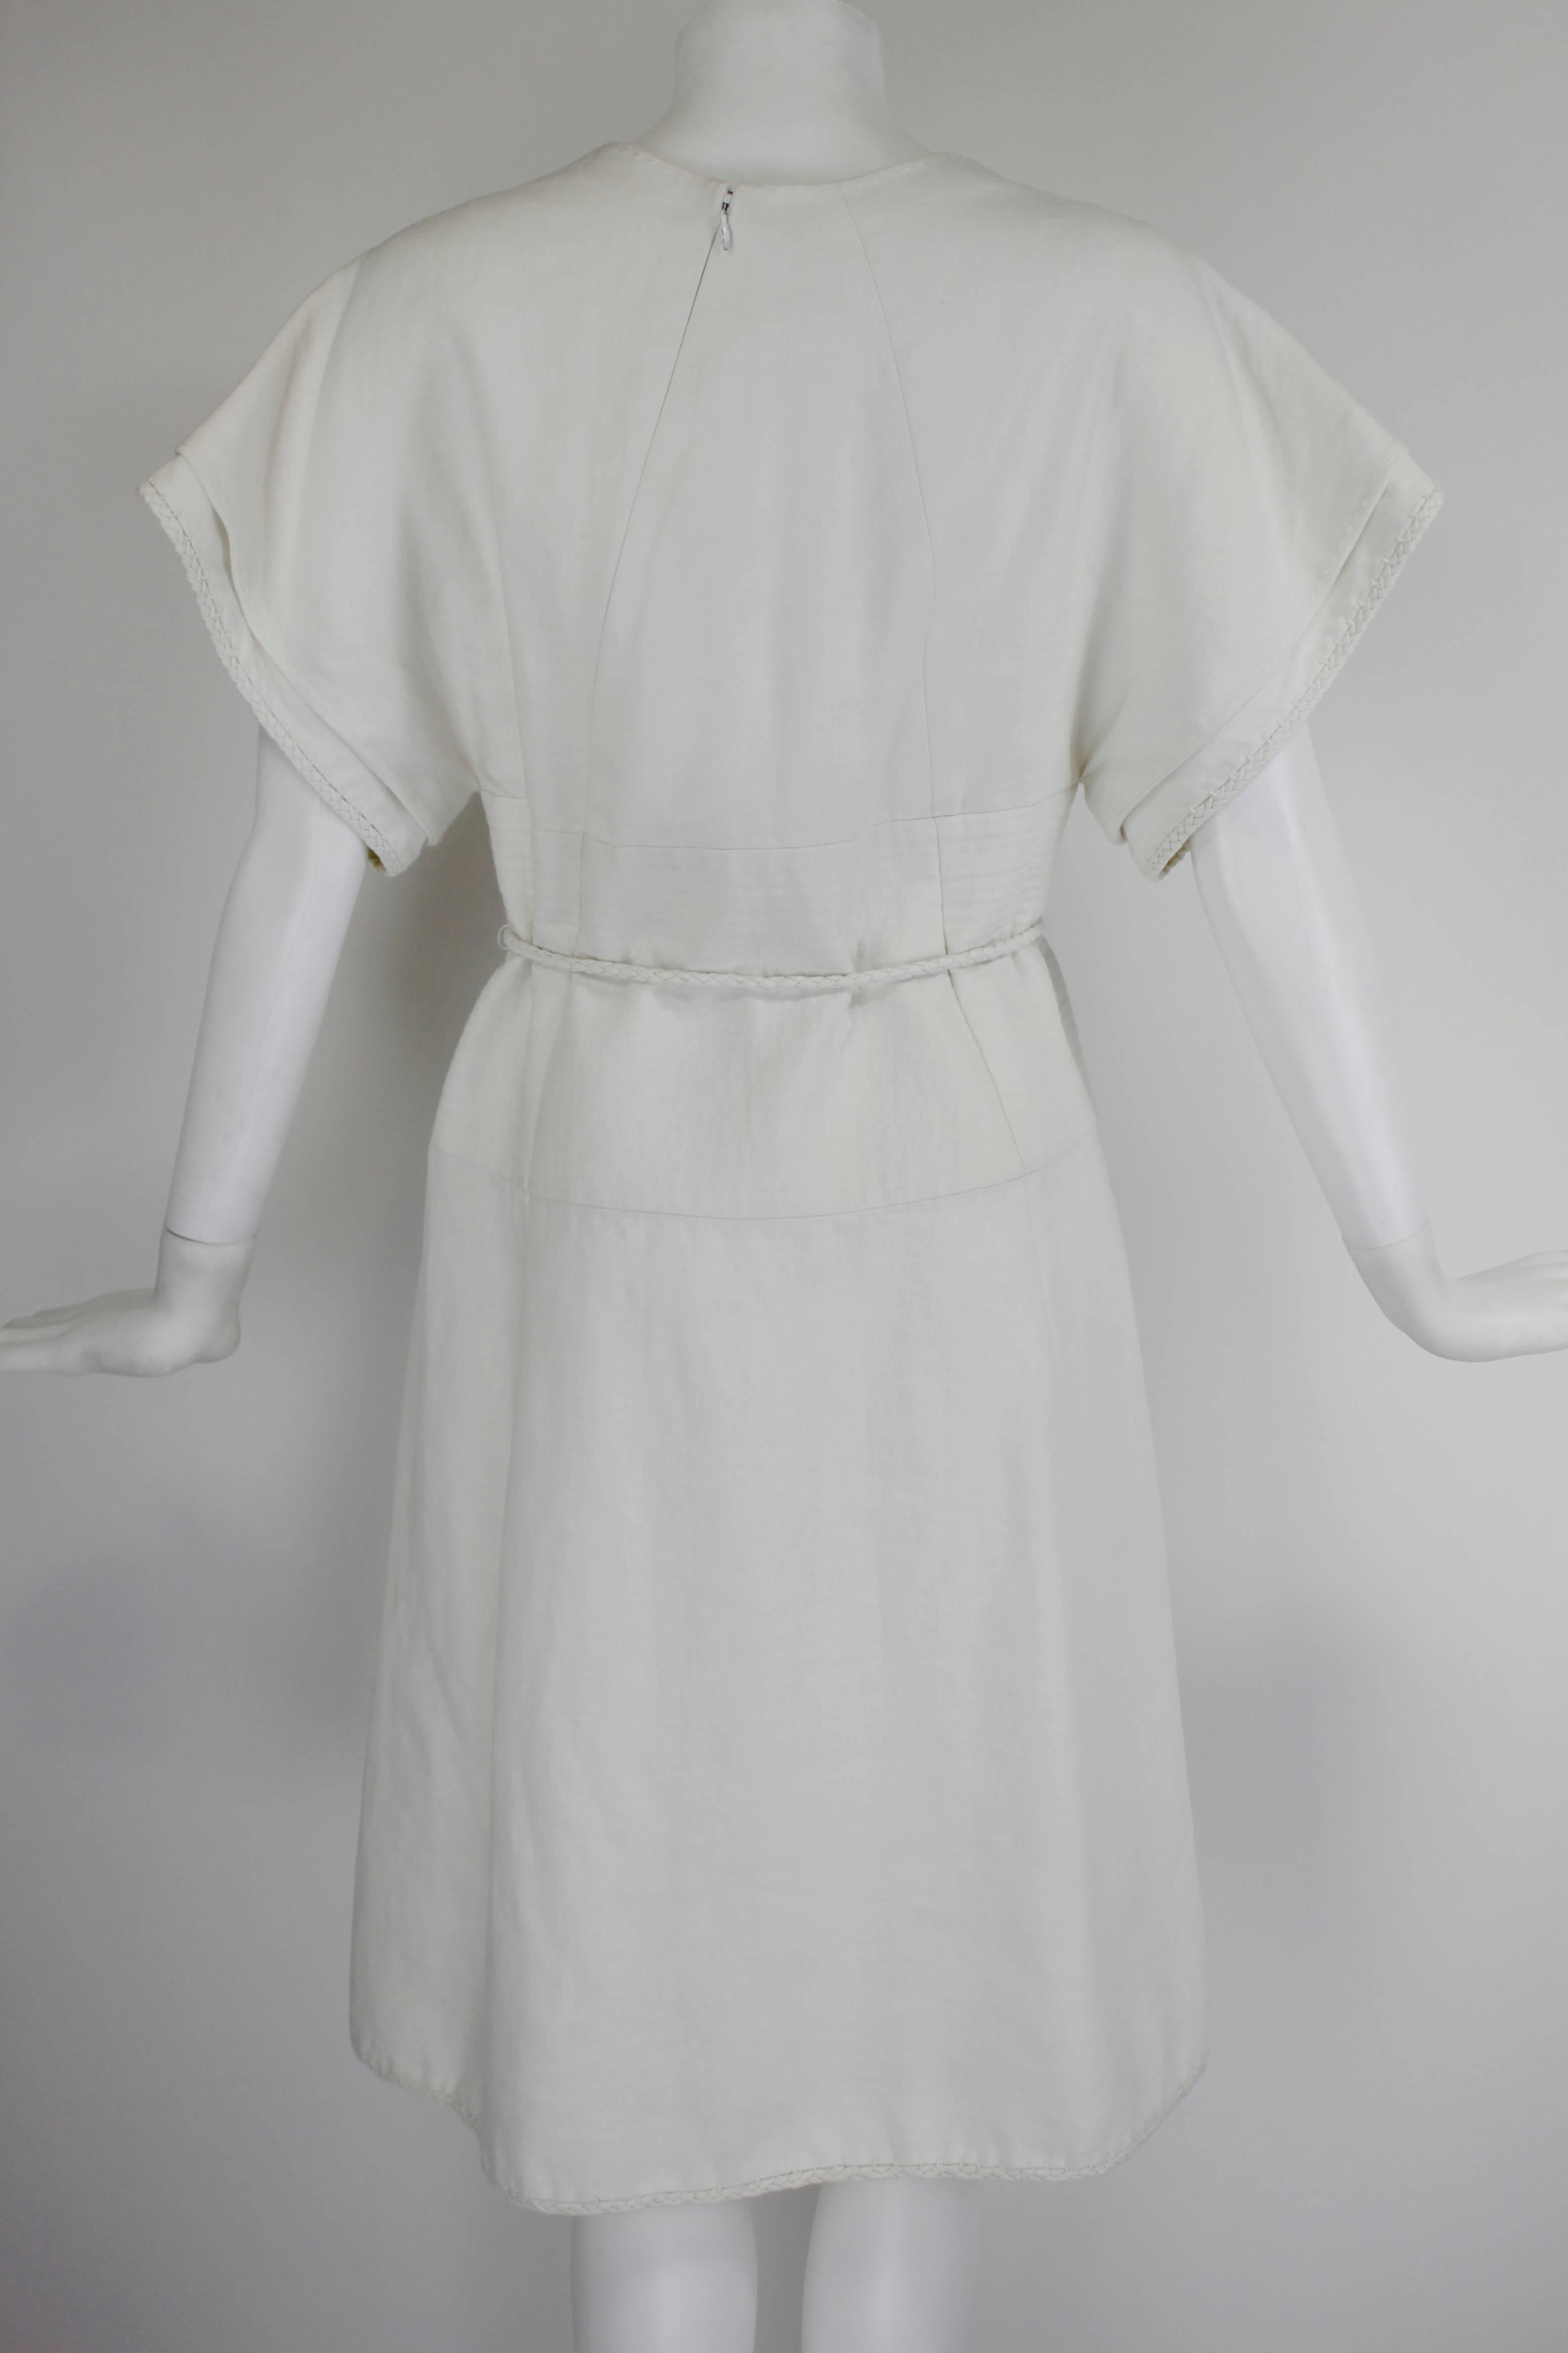 Chado Ralph Rucci Off-White Linen Dress In Excellent Condition In Los Angeles, CA